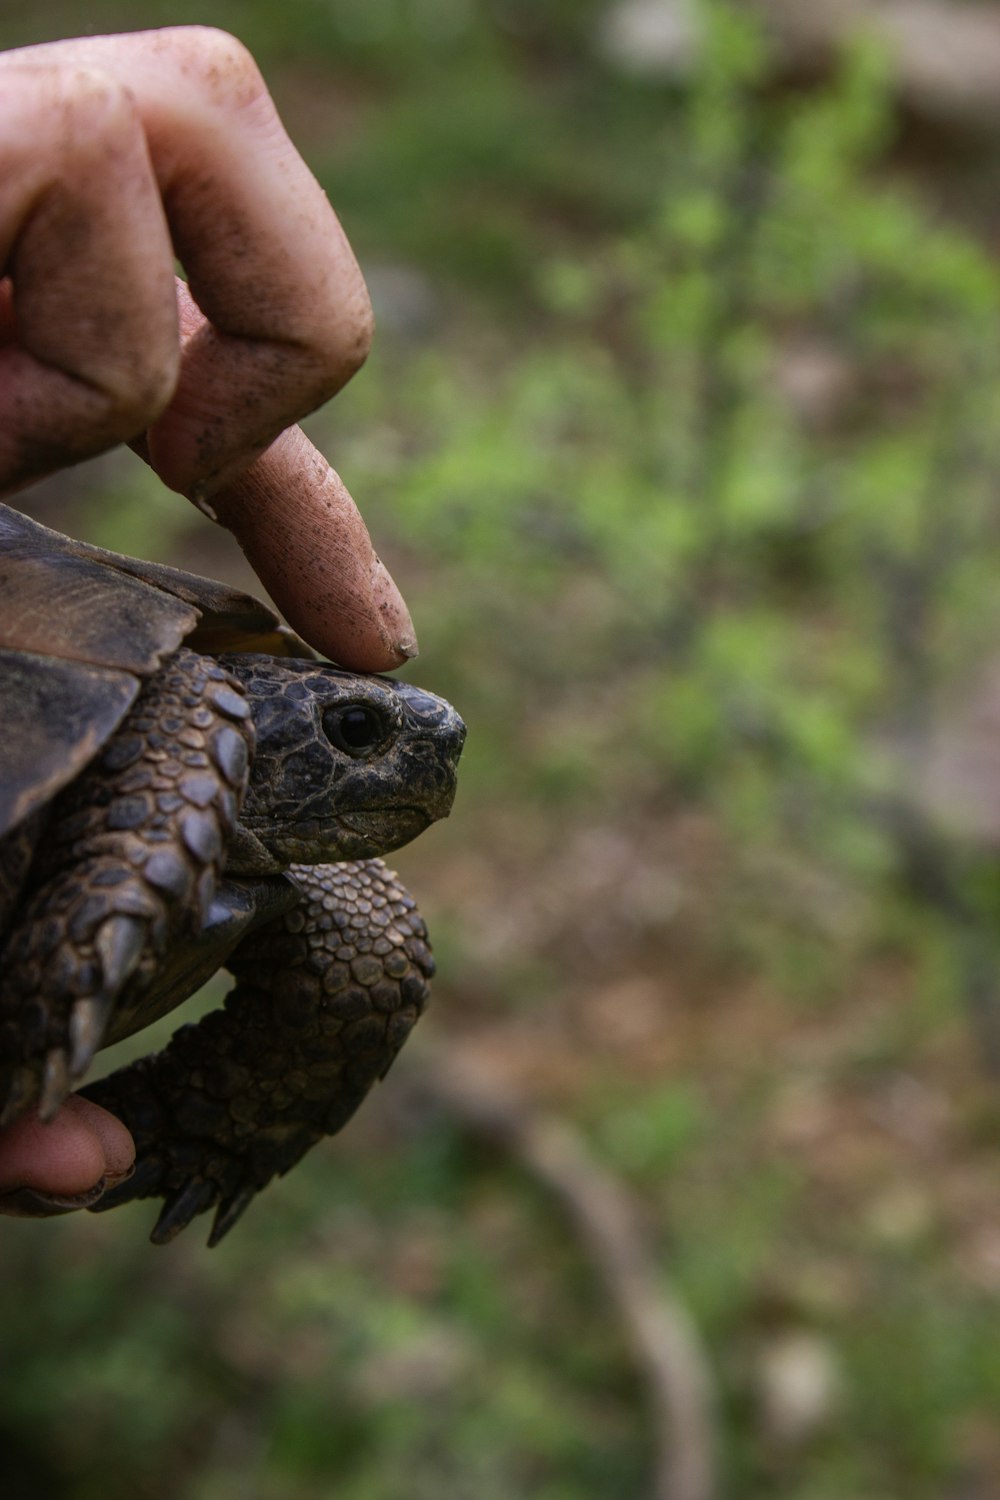 a close up of a person holding a small turtle